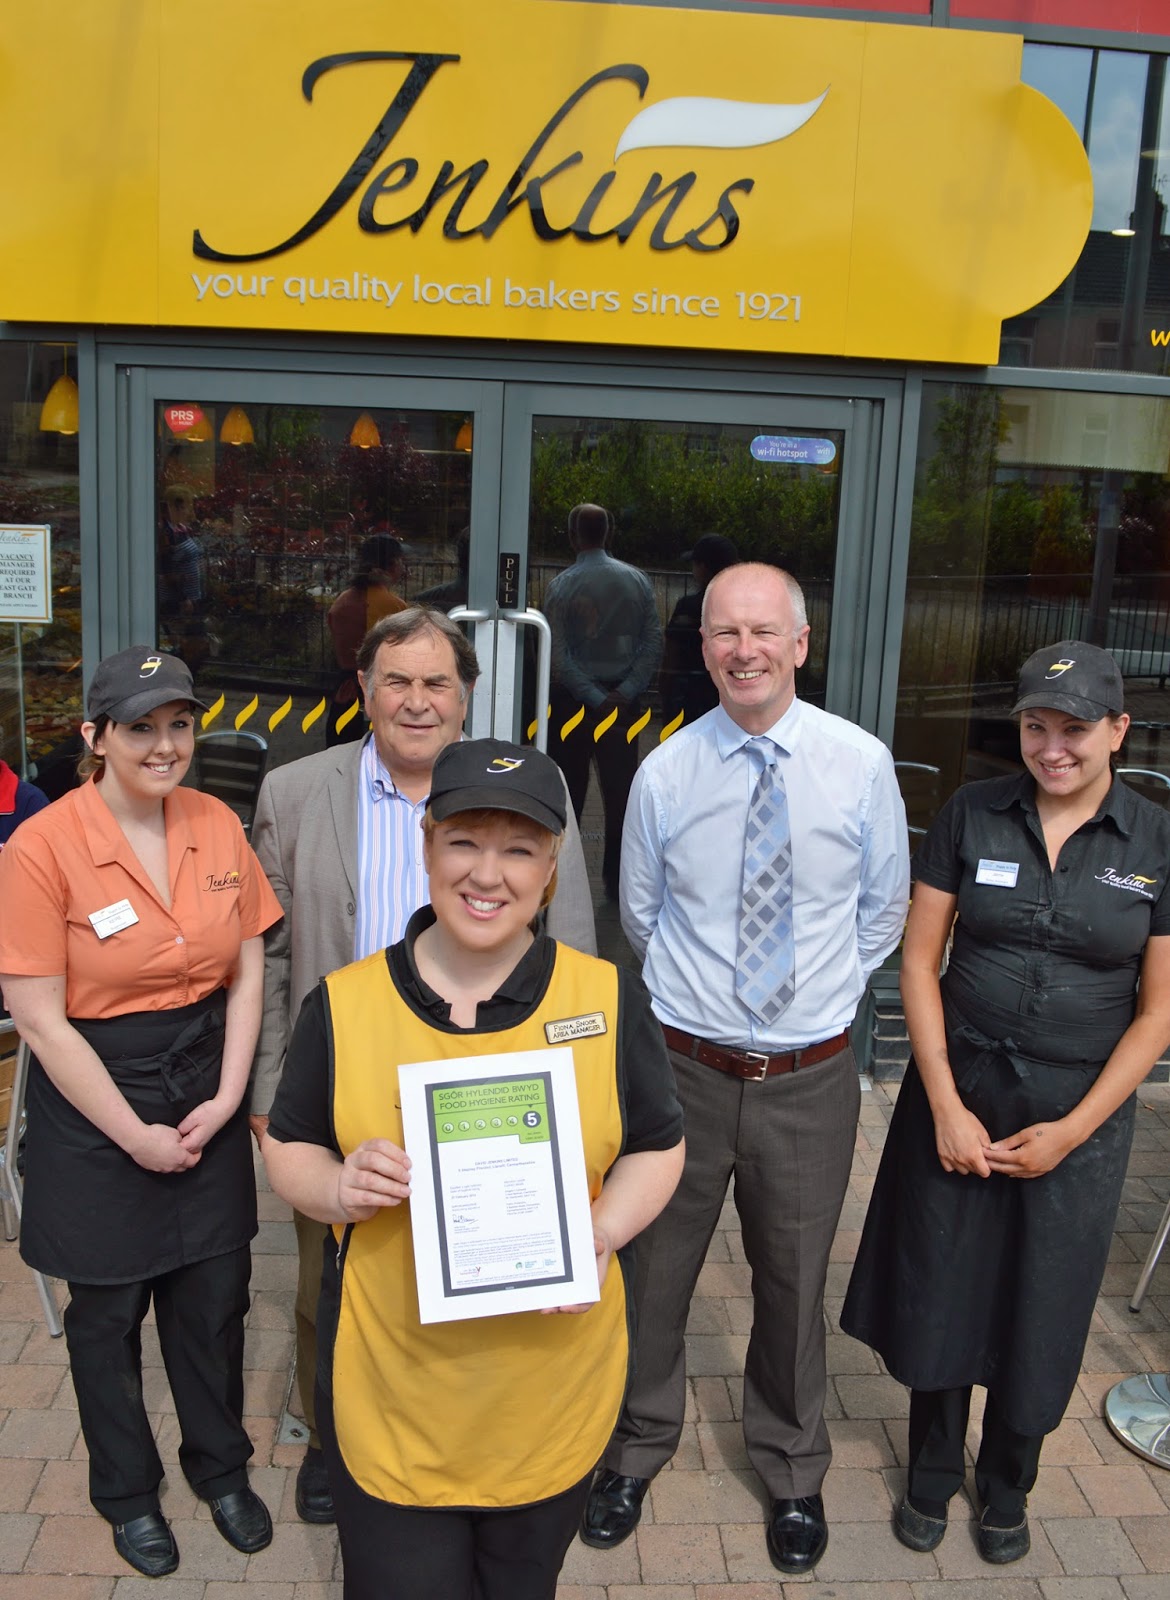 5-Star food hygiene achievement for the Jenkins Bakery! photo